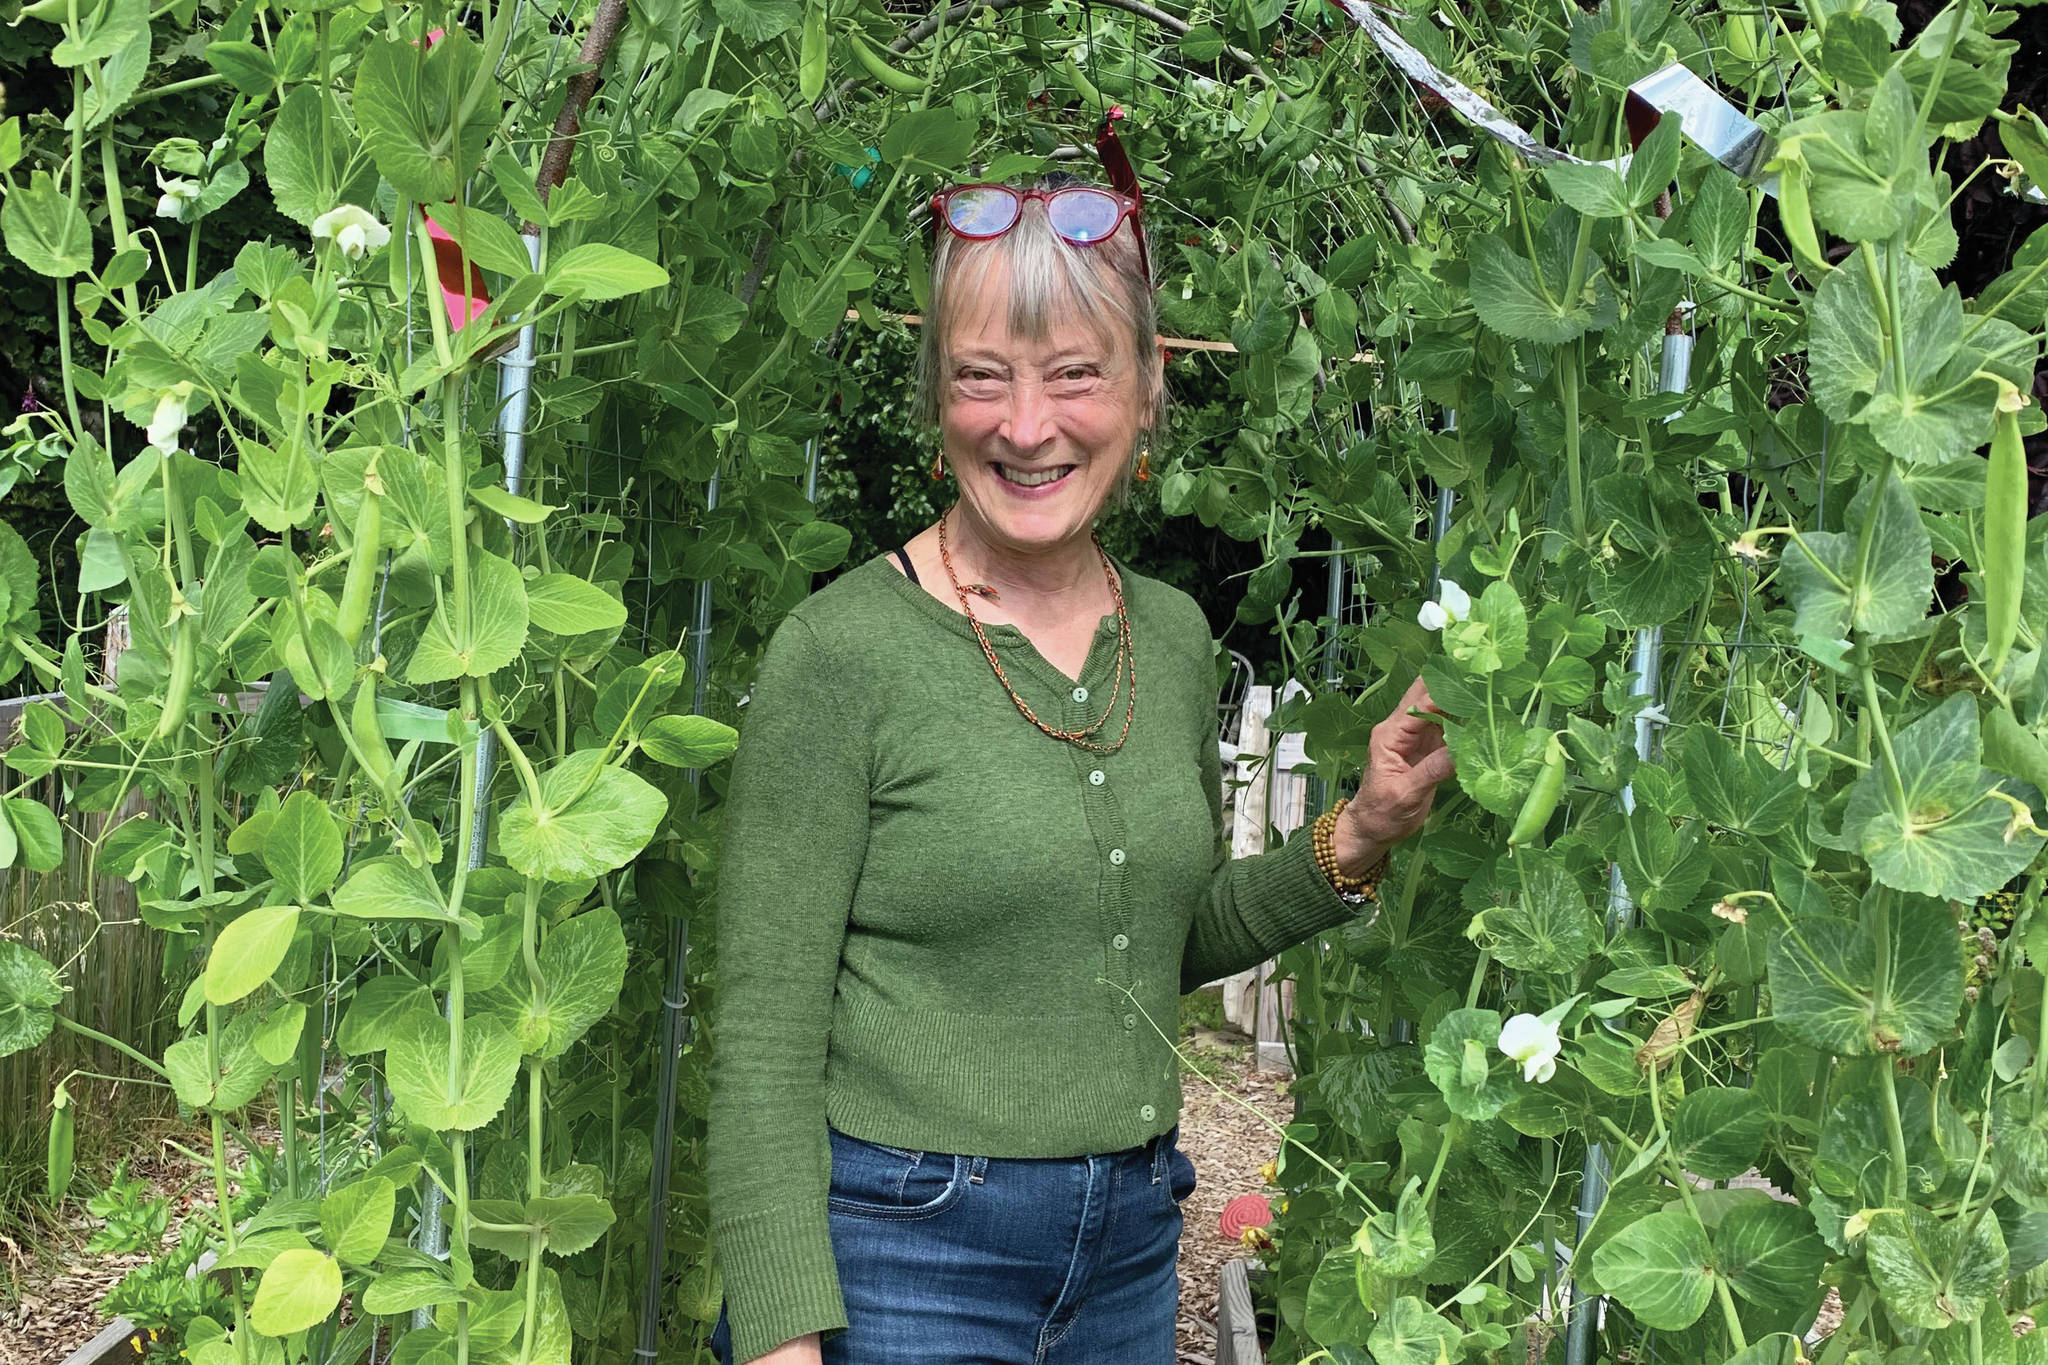 Debi Poore stands under her very successful pea tunnel on Aug. 20, 2021, at her home in Homer, Alaska. (Photo by Rosemary Fitzpatrick)